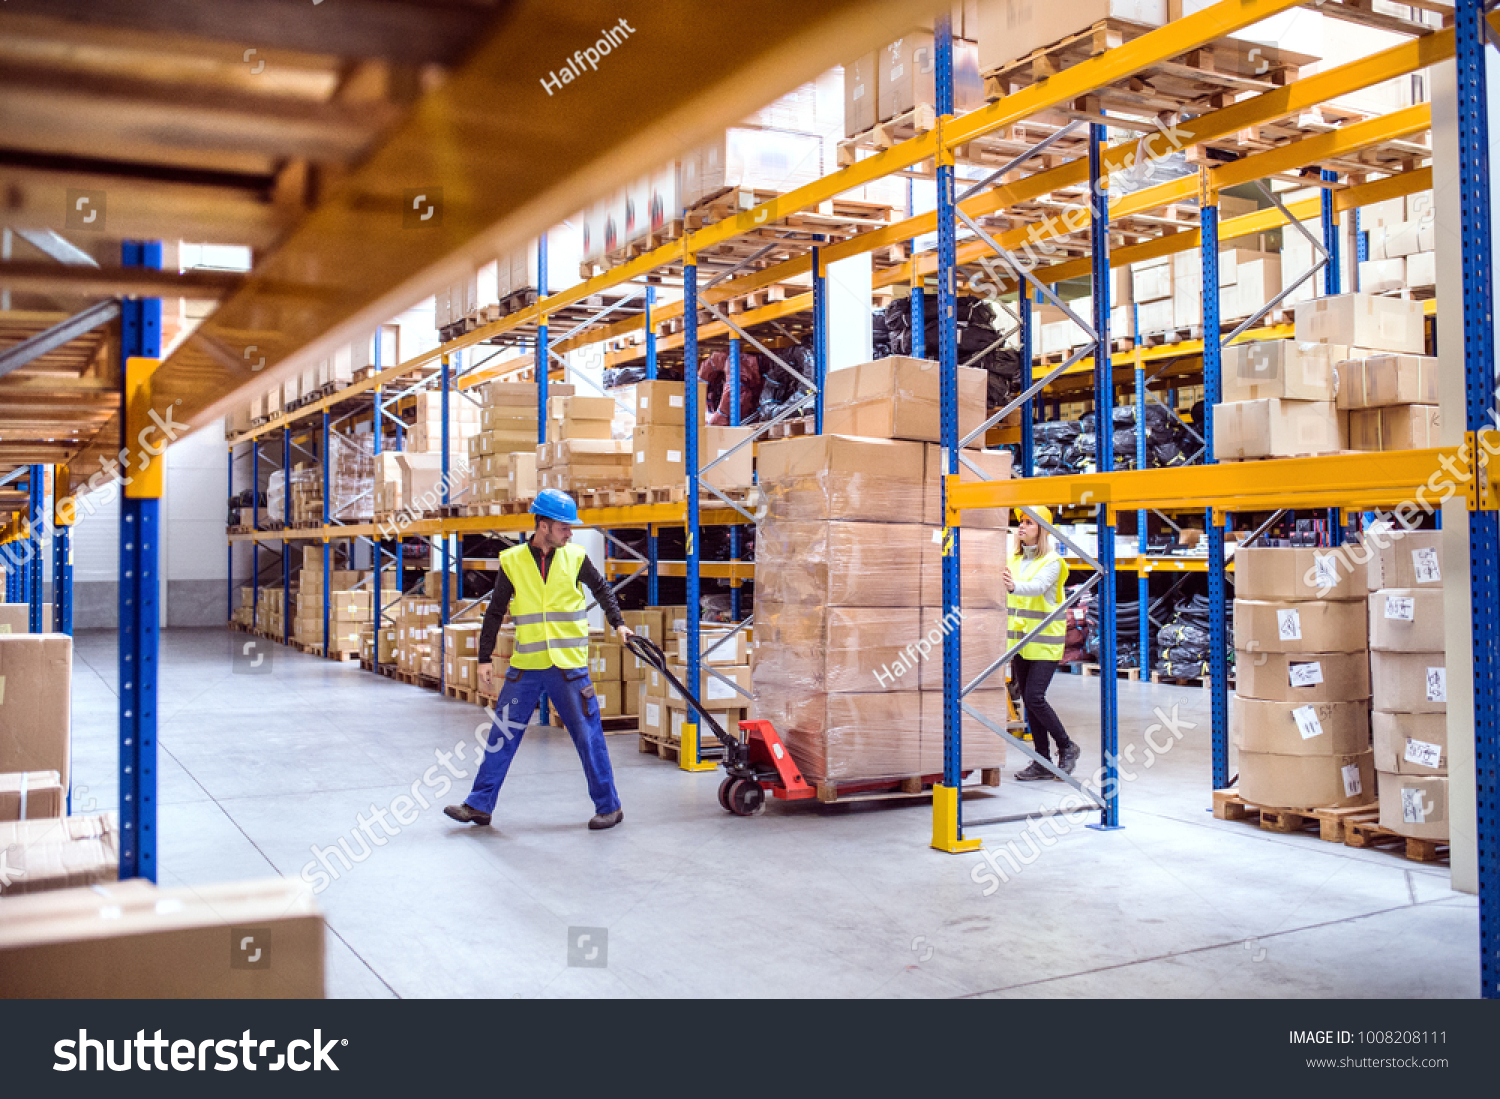 Warehouse workers pulling a pallet truck. #1008208111